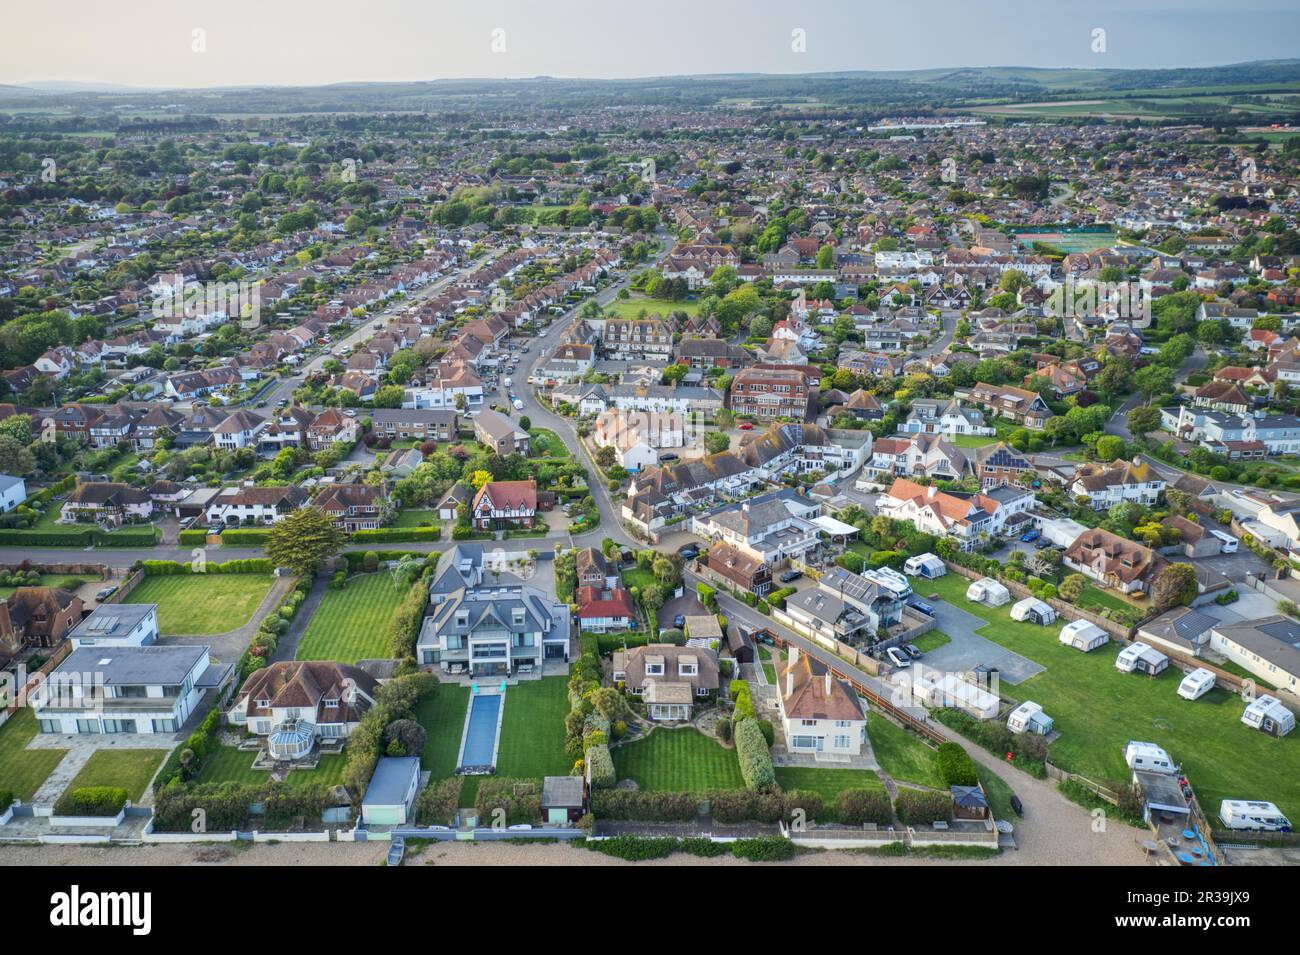 East Preston seafront in West Sussex on the Southern Coast of England, Aerial photo. Stock Photo